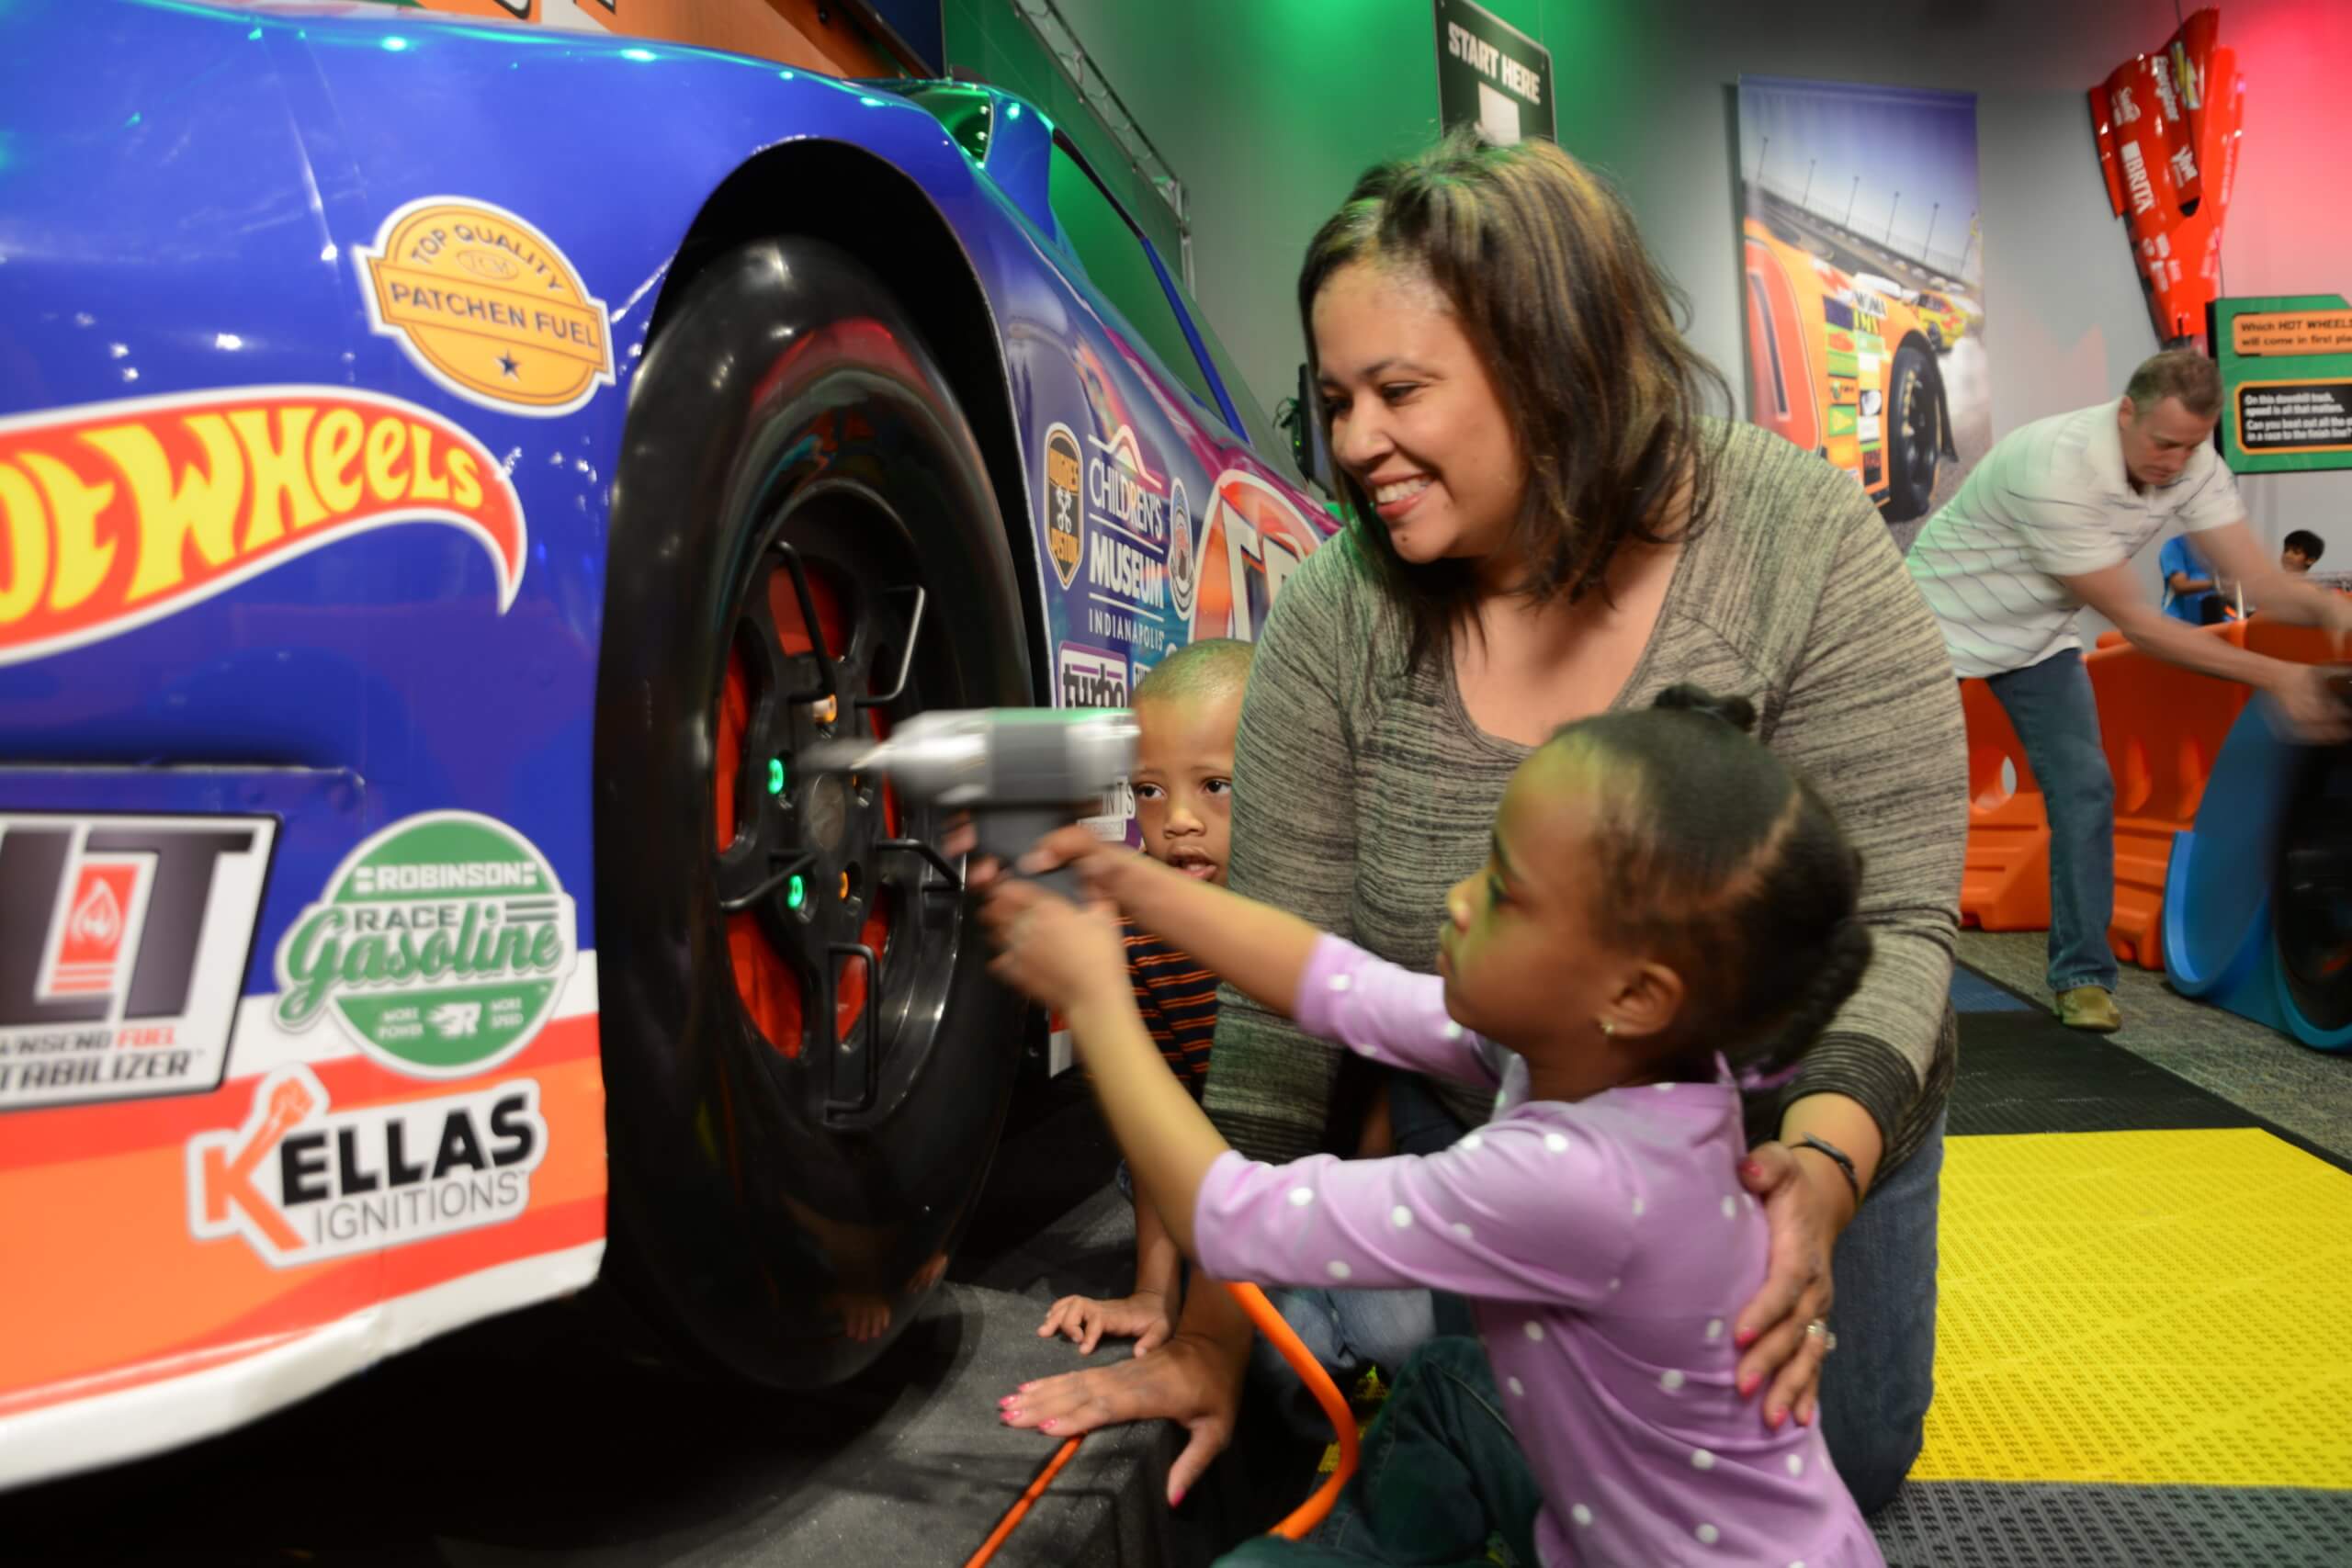 A mom helps her daughter screw in a hubcap on a life-sized hot wheels race car.